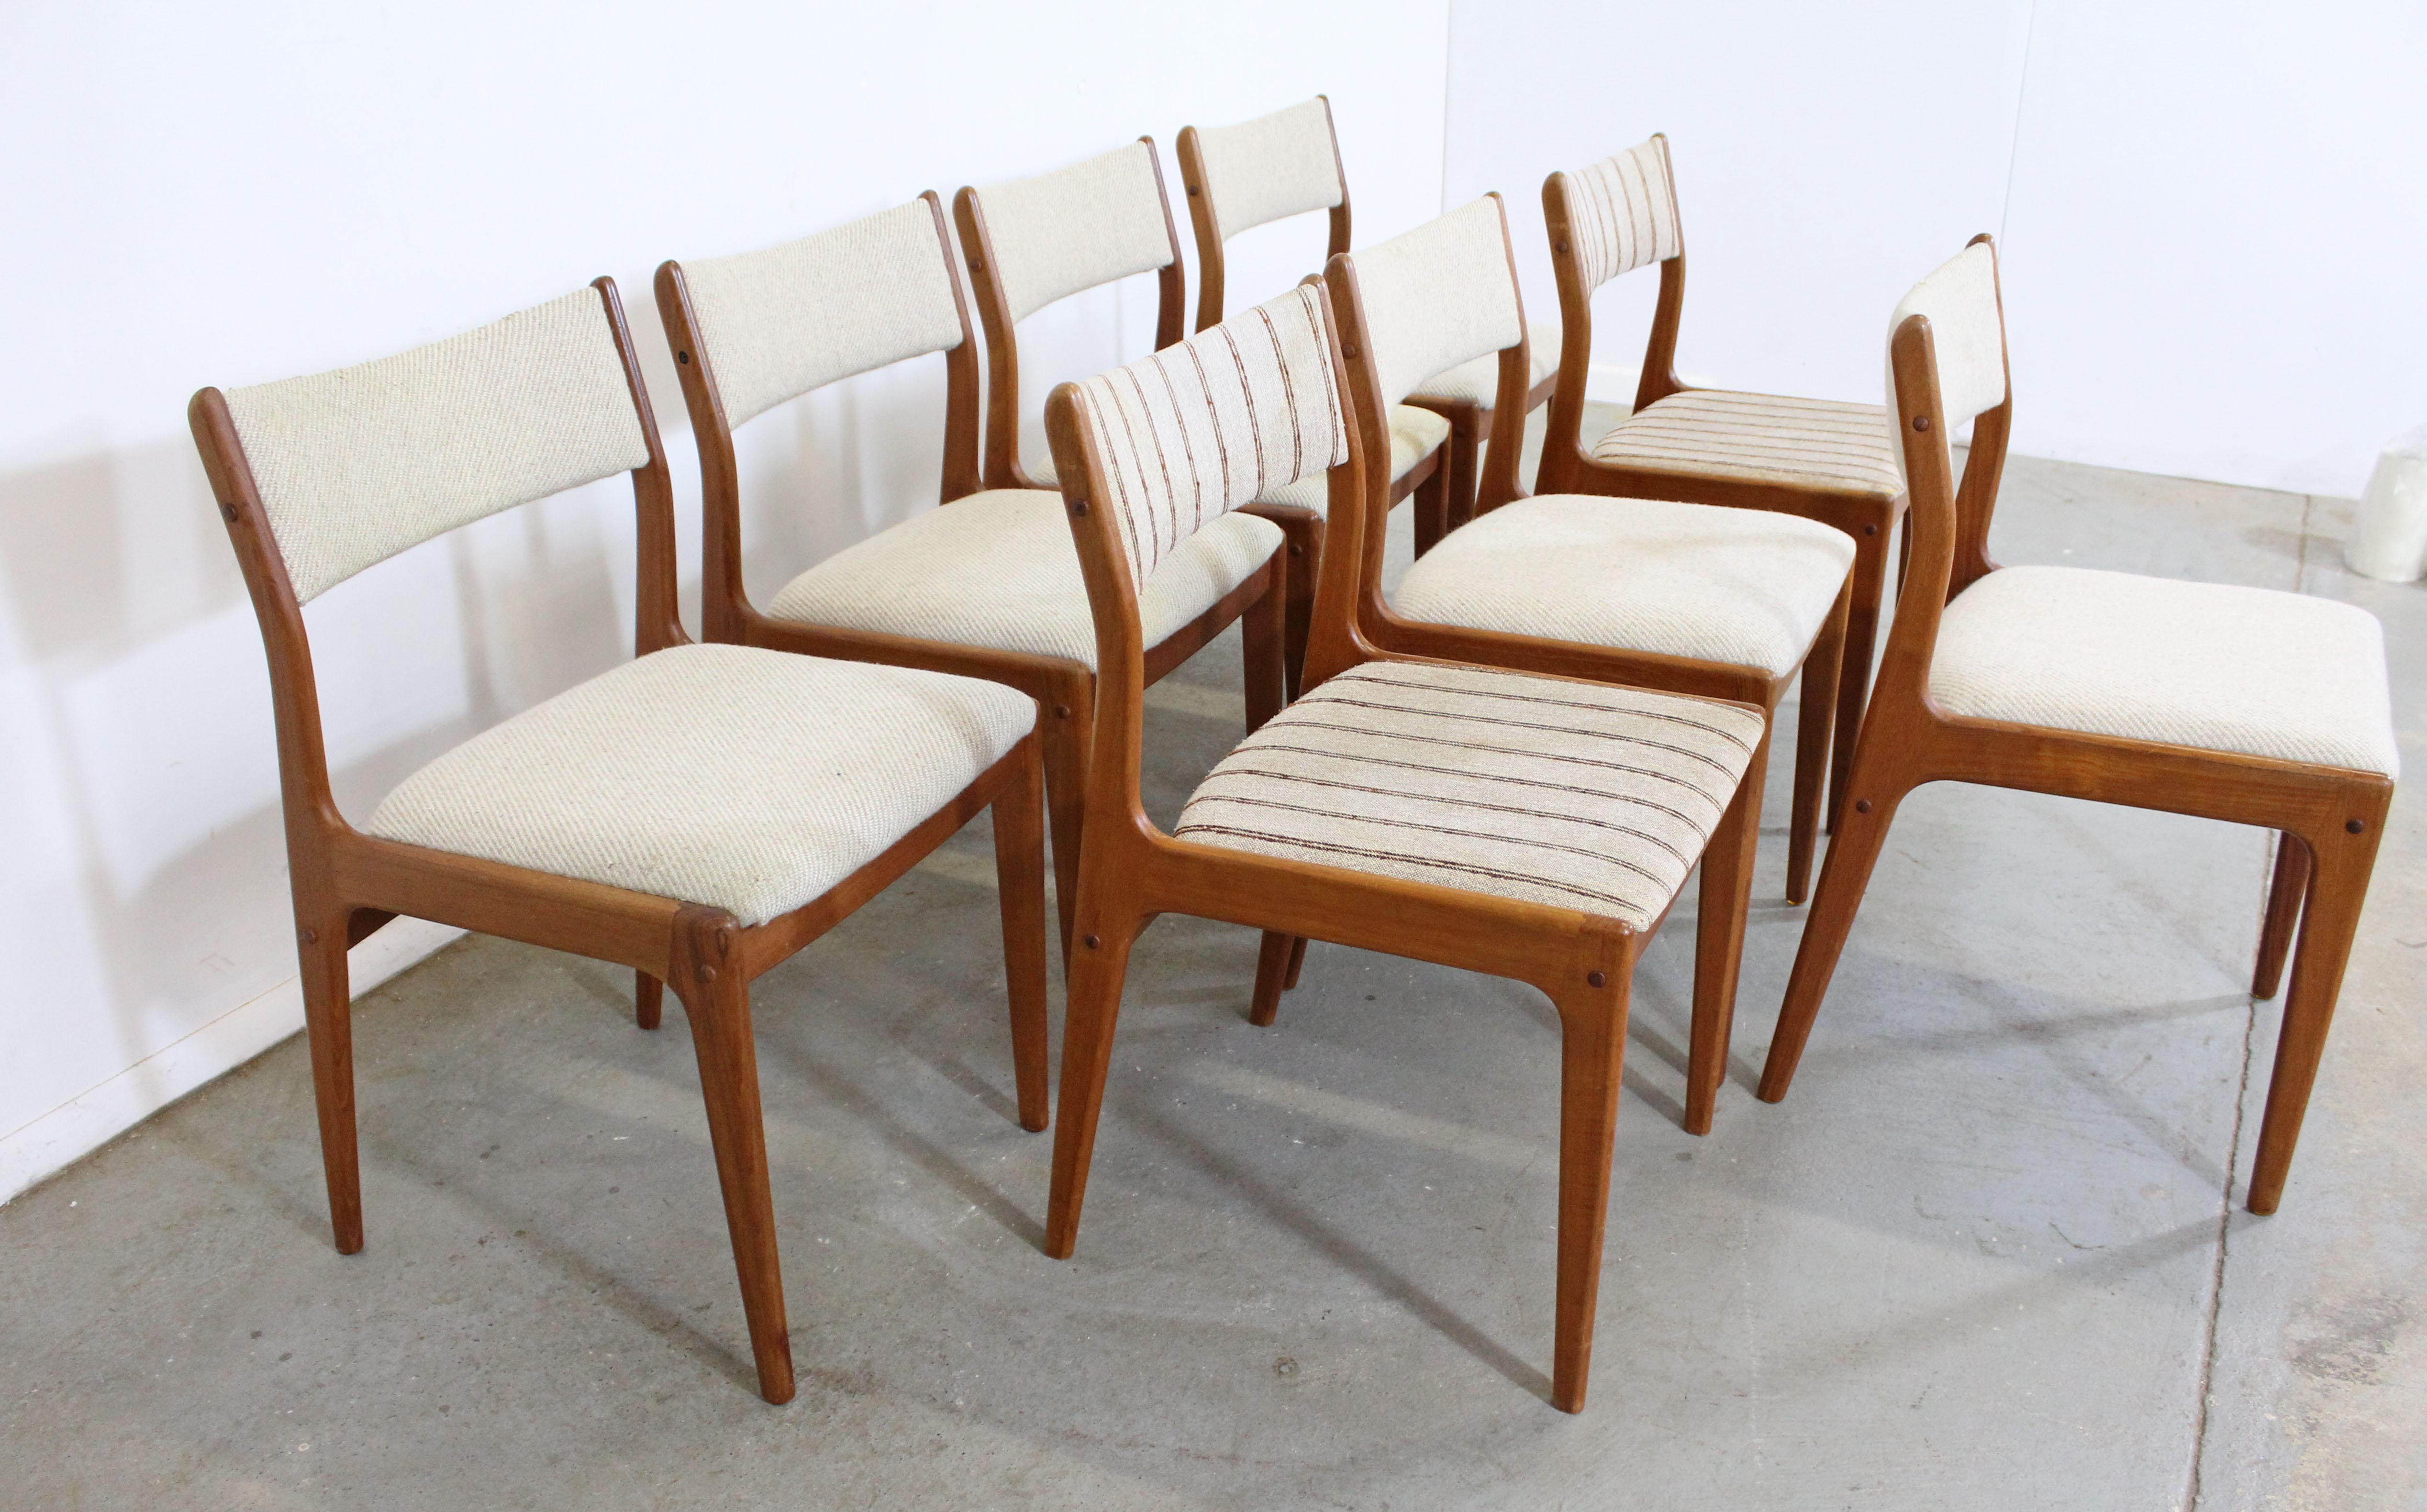 Offered is a set of 8 Danish Modern teak dining chairs designed by Johannes Andersen for Uldum Mobelfabrik. Includes 8 teak side chairs. The set is in vintage condition, need to be reupholstered, showing stains and tears on the fabric, a previous